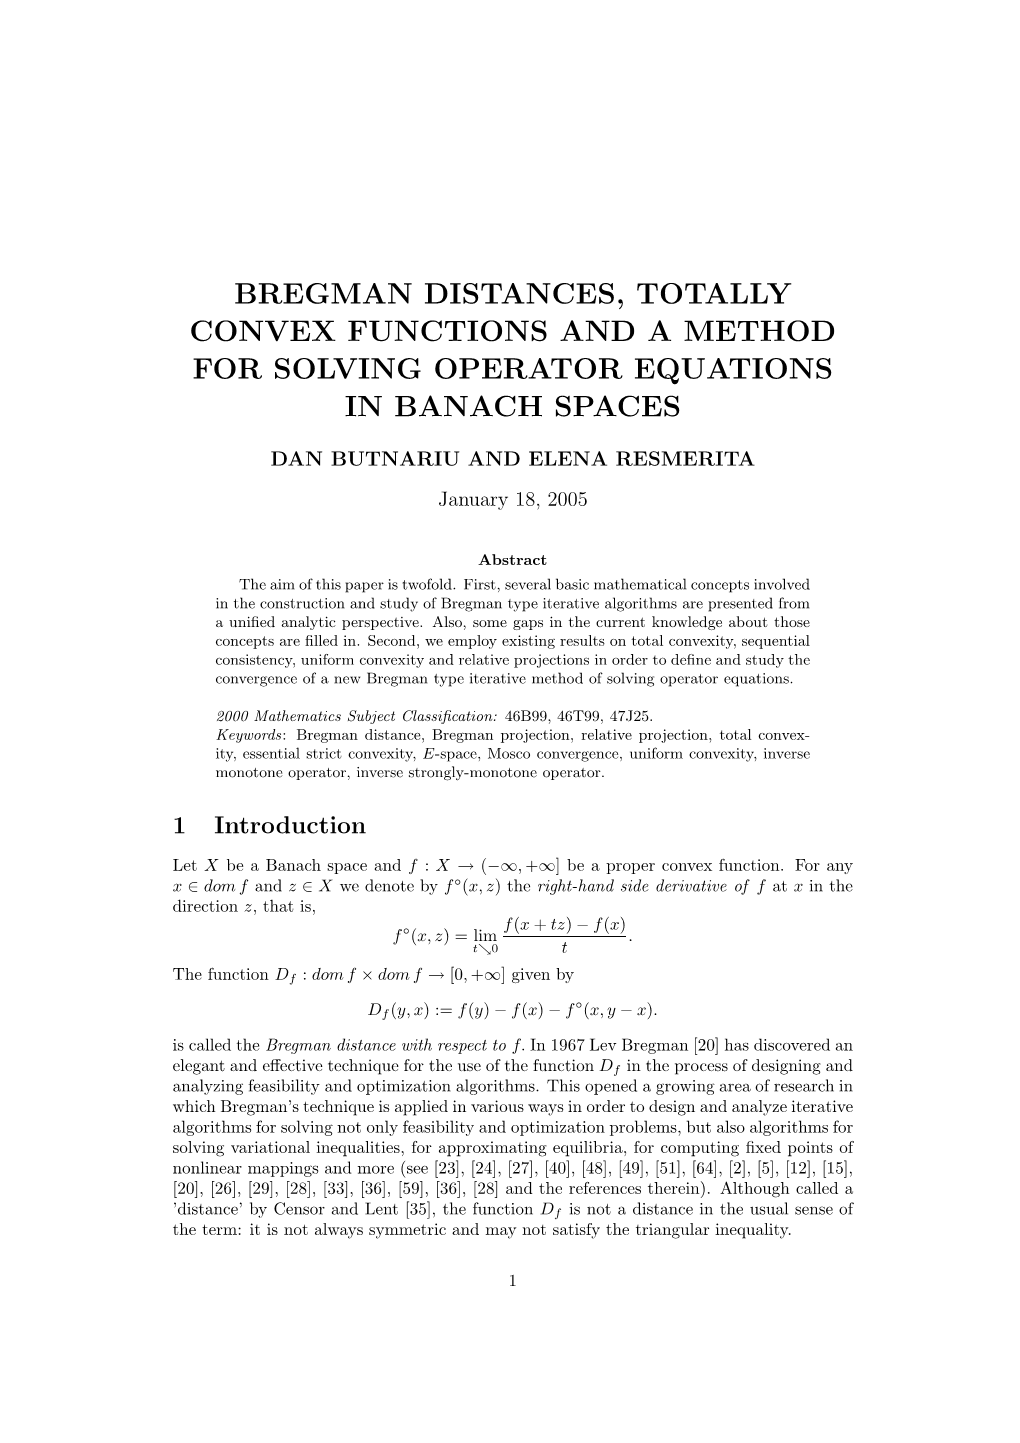 Bregman Distances, Totally Convex Functions and a Method for Solving Operator Equations in Banach Spaces